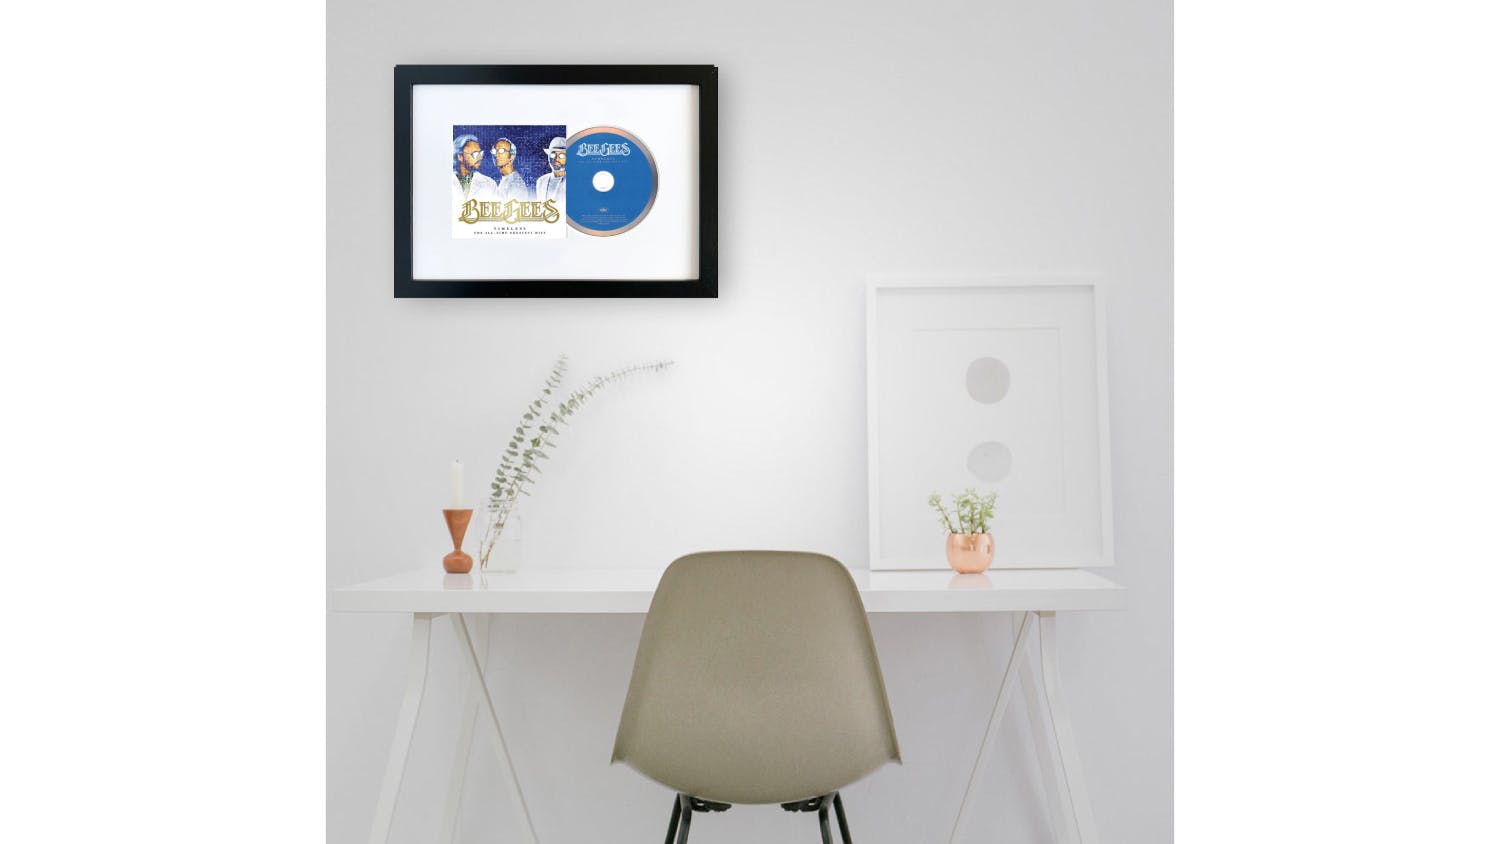 Bee Gees - Timeless: The All-Time Greatest Hits Framed CD + Album Art